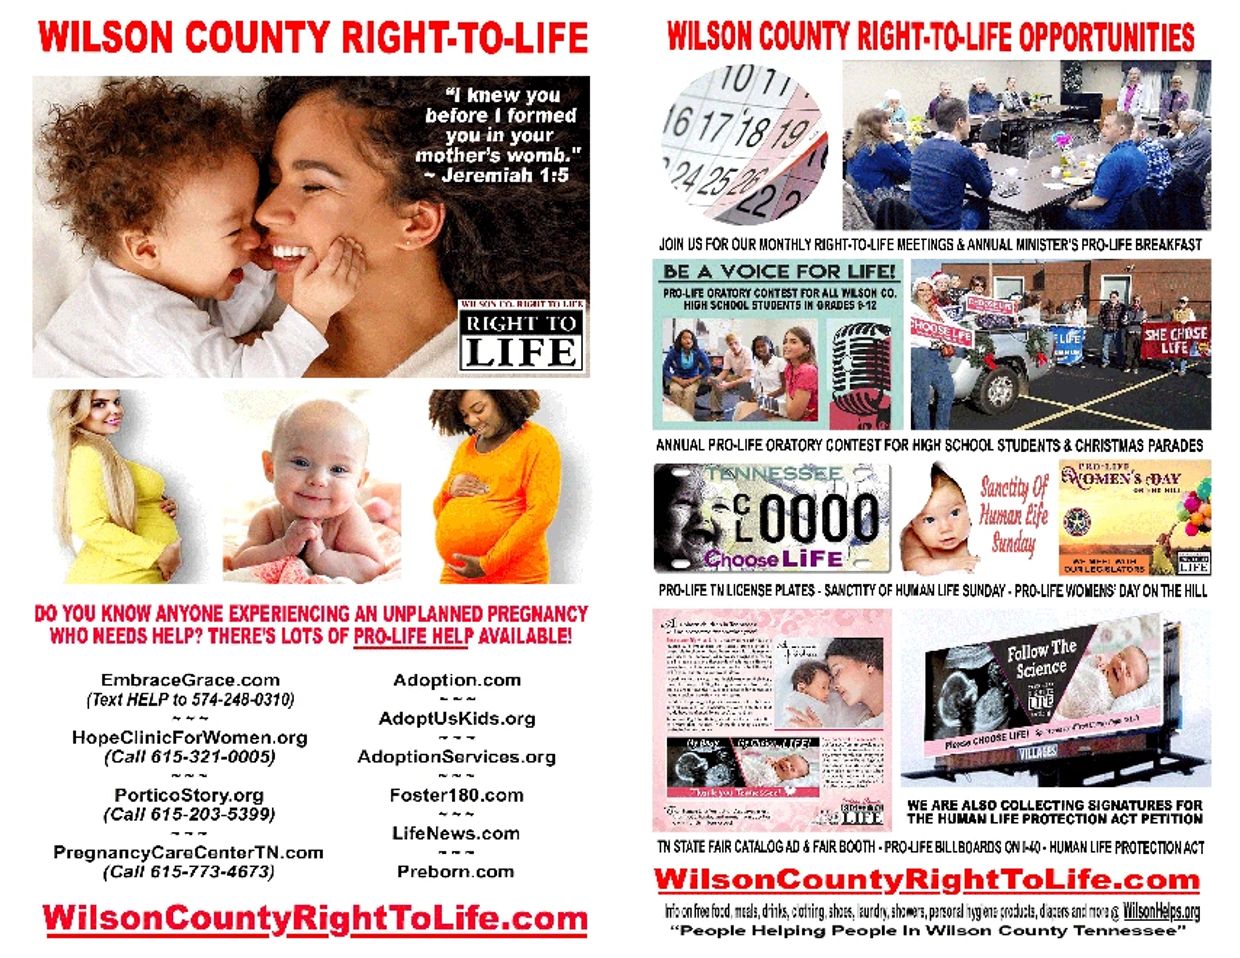 Download and print the WILSON COUNTY RIGHT TO LIFE FLYER/BULLETIN INSERTS